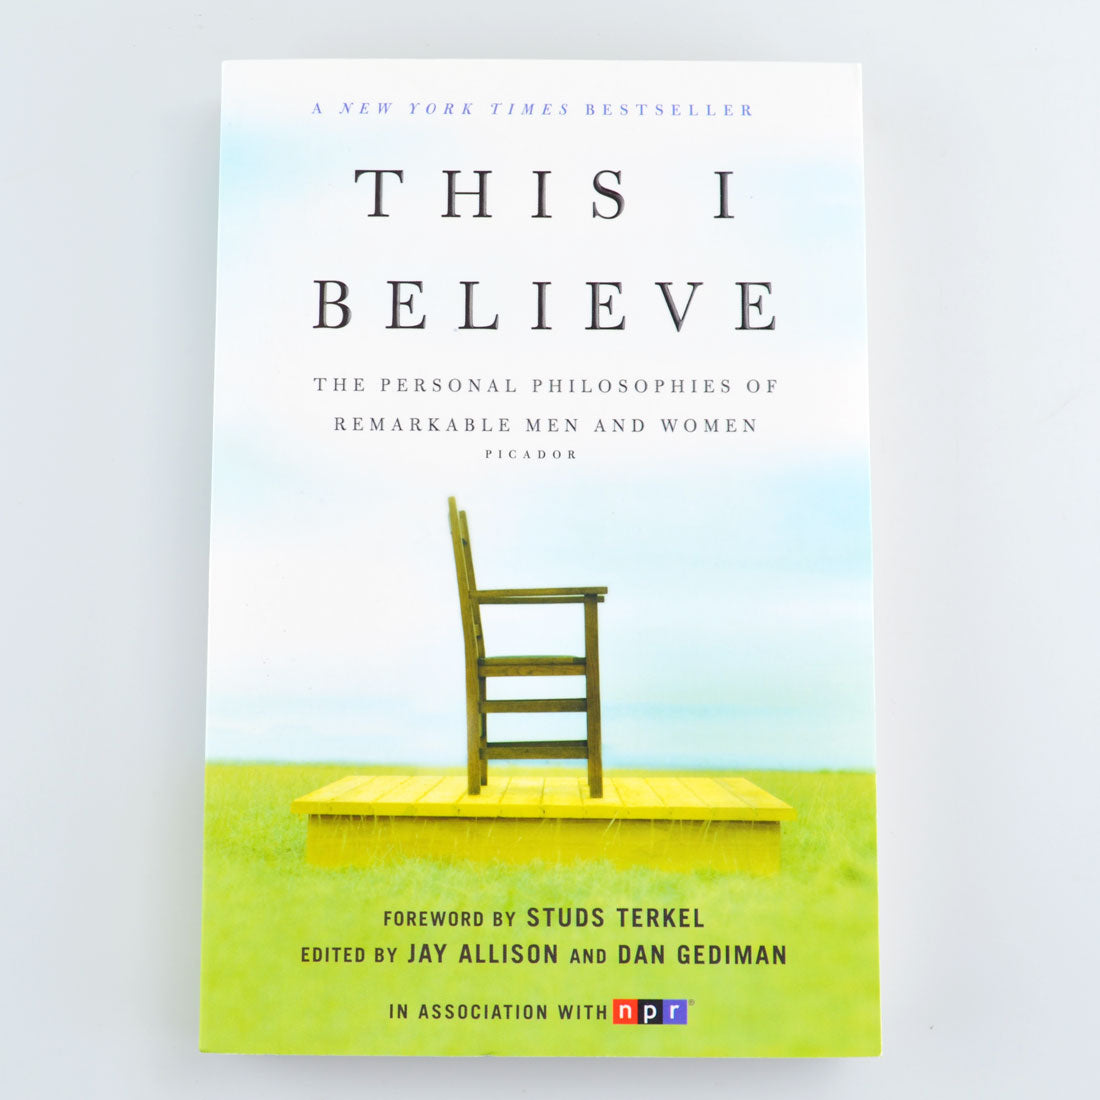 This I Believe by Jay Allison and Dan Gediman